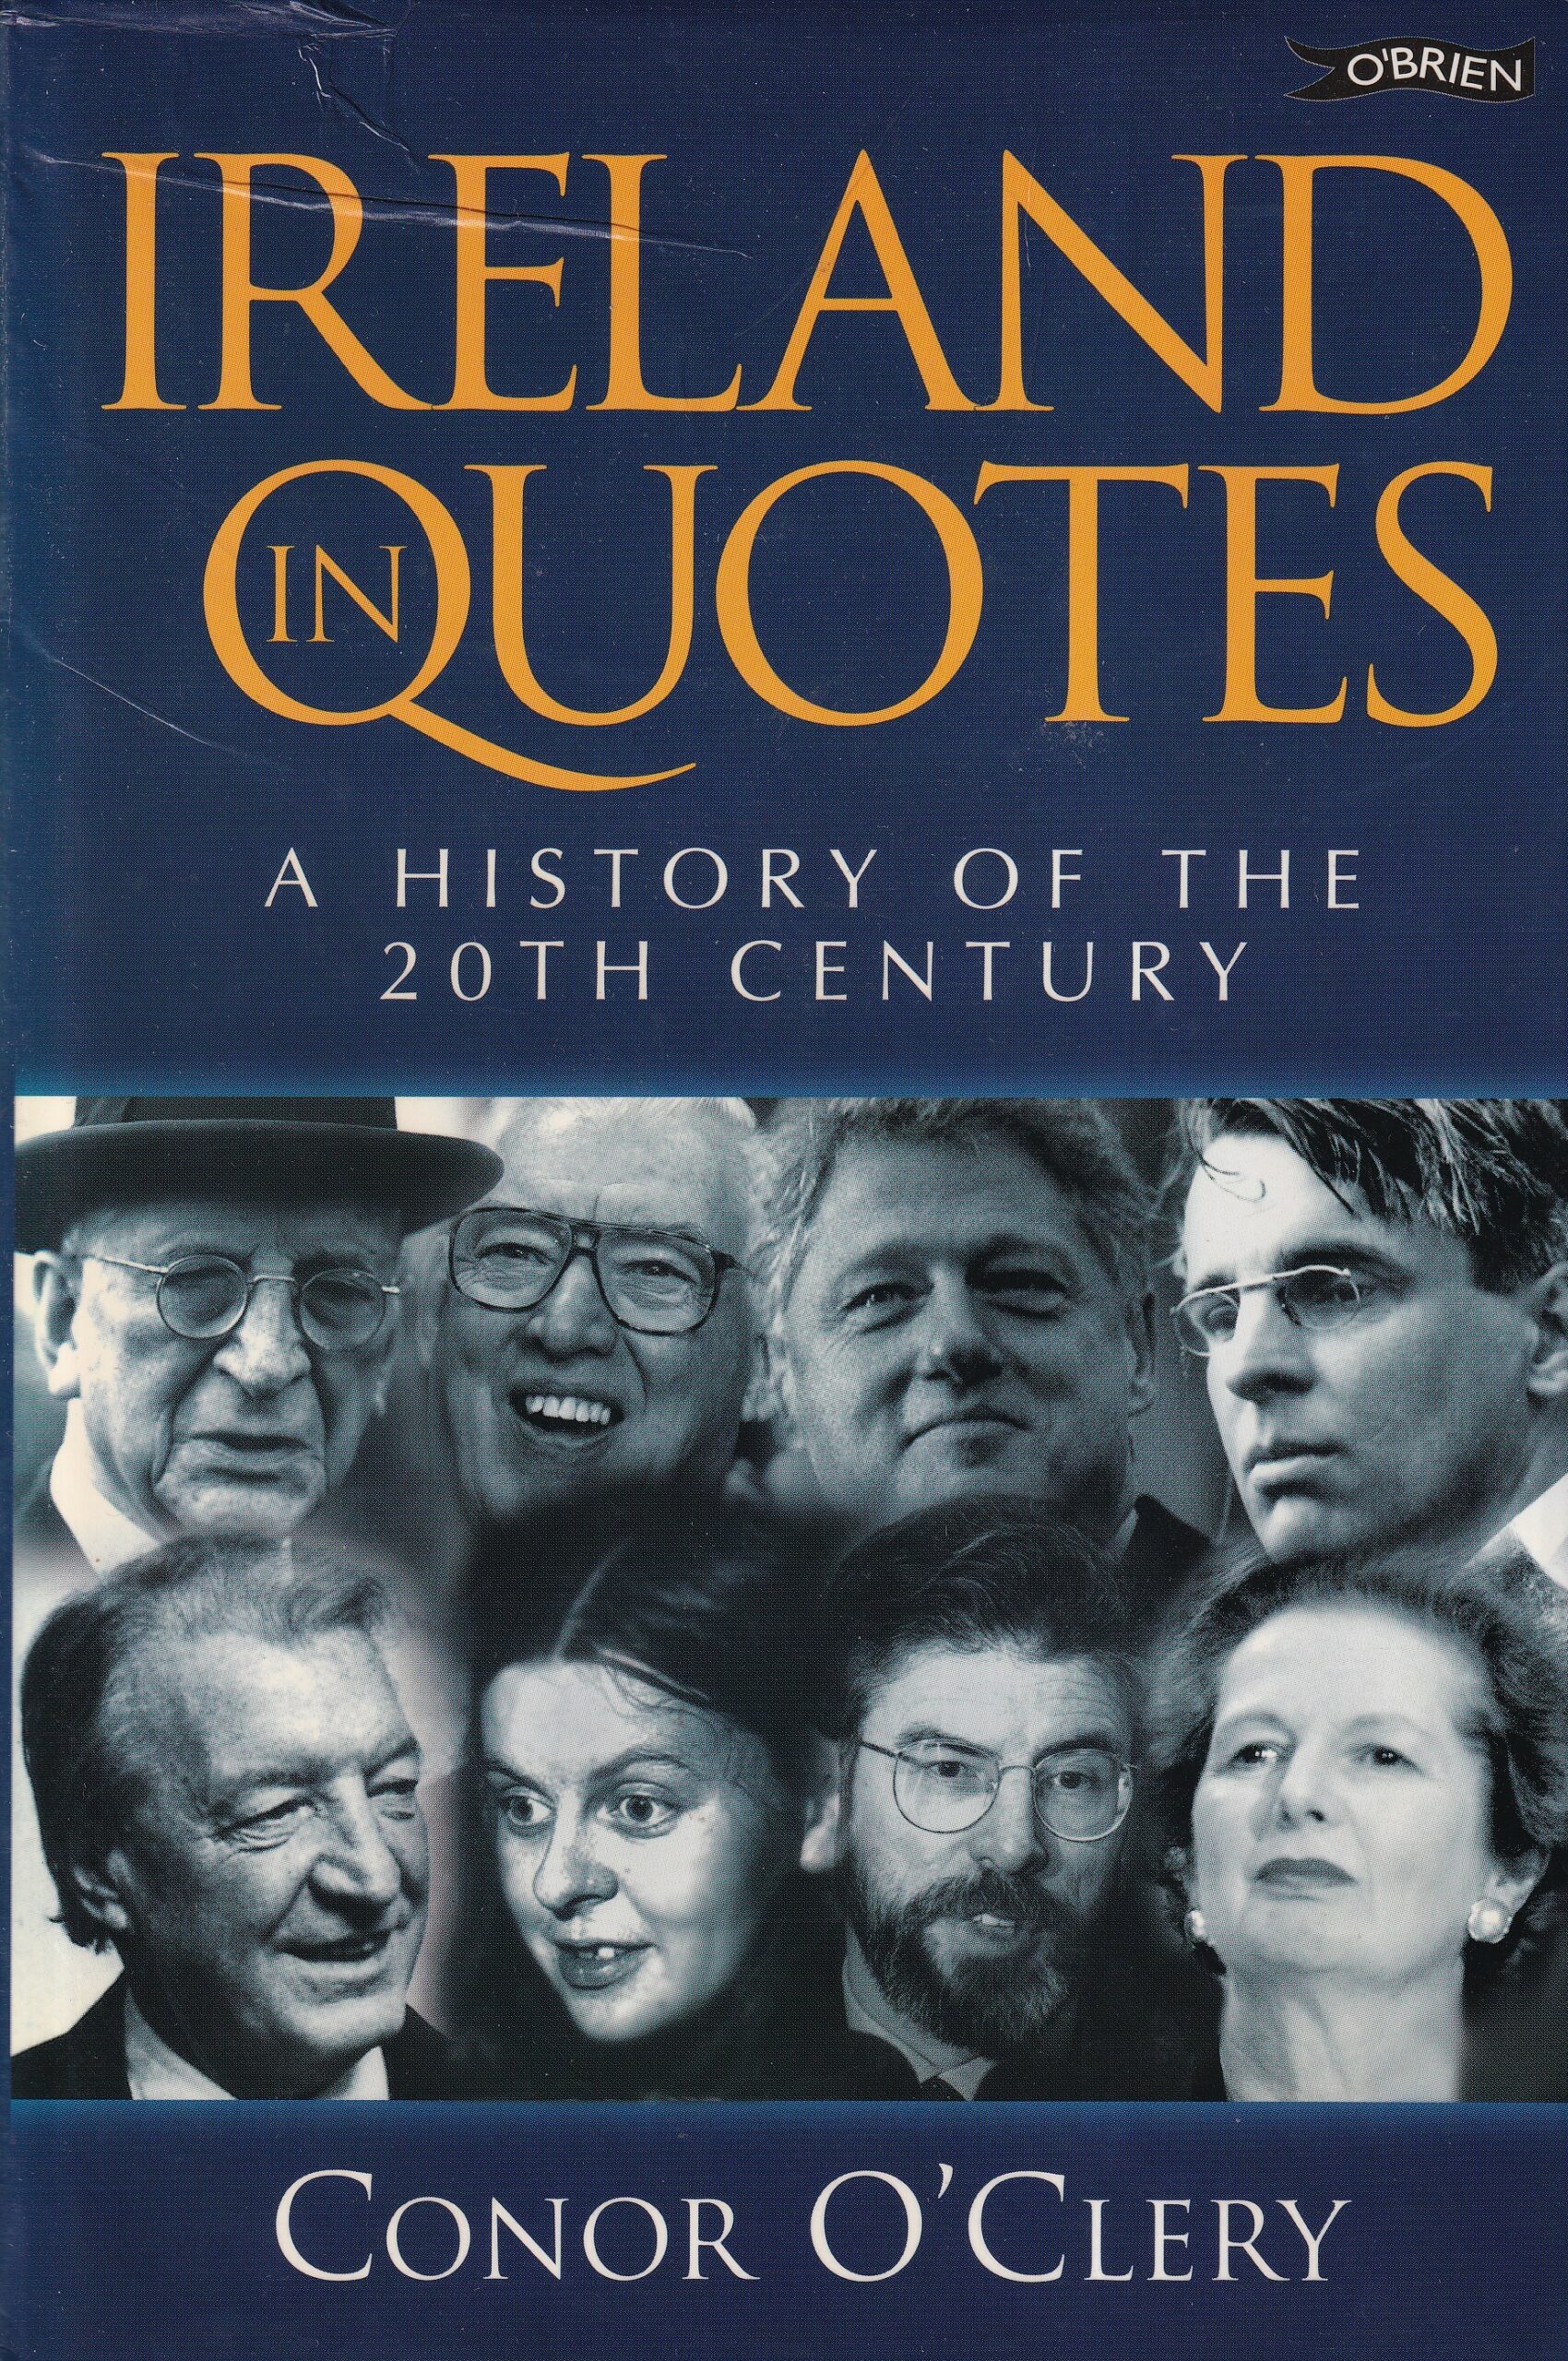 Ireland in Quotes: A History of the 20th Century by Conor O'Clery